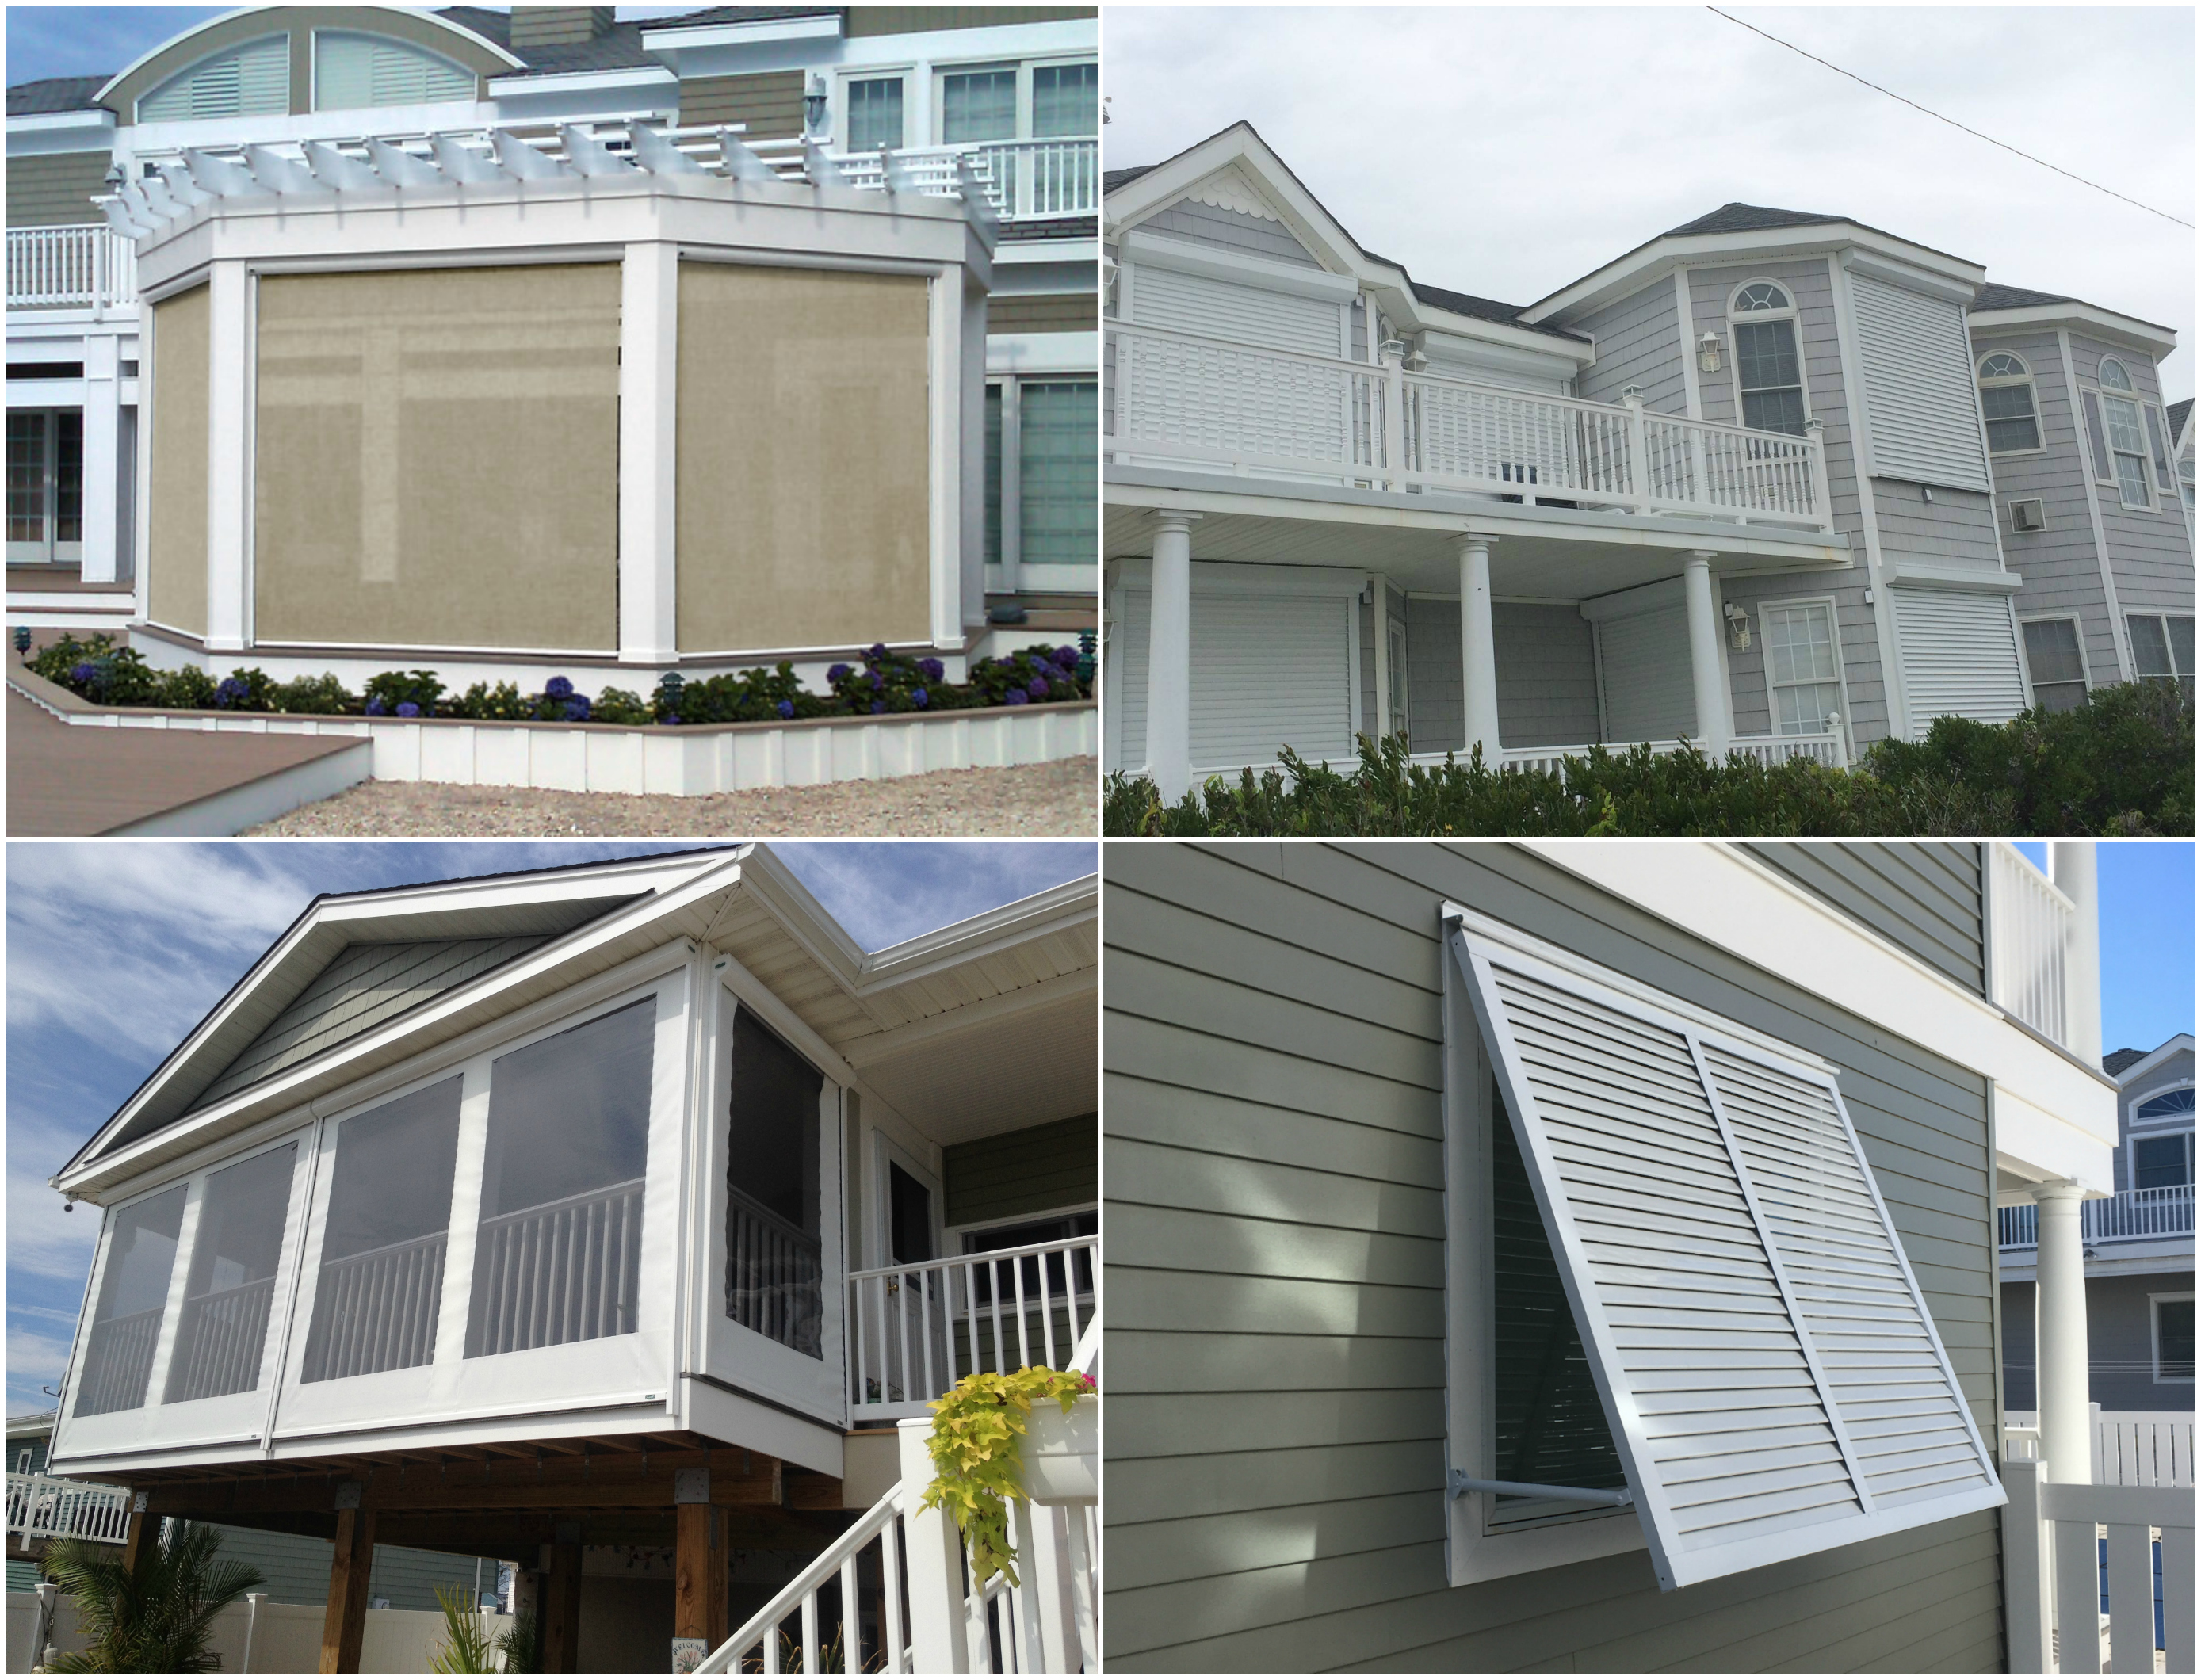 Awnings by Bill Lloyd Offers Added Protection and Privacy for Your Home